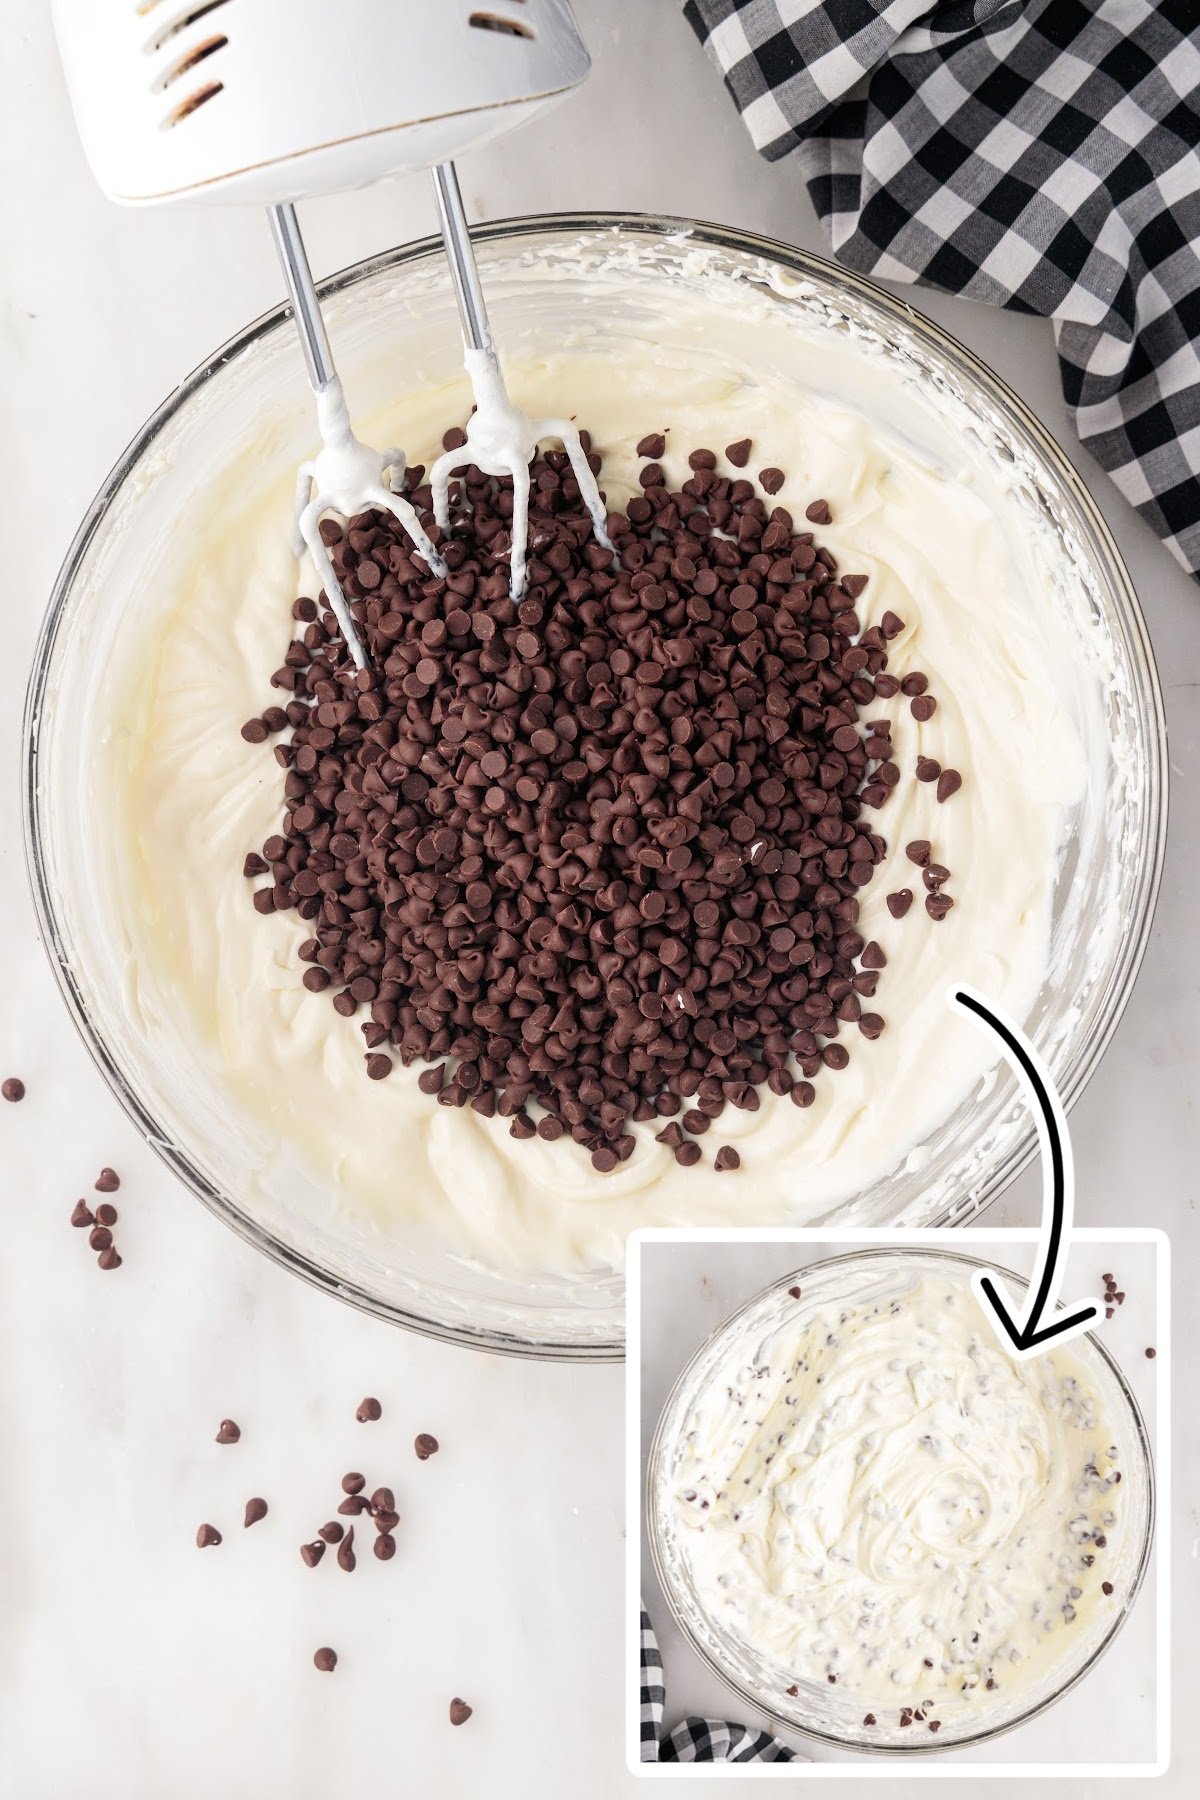 Adding in the mini chocolate chips into the mixture.